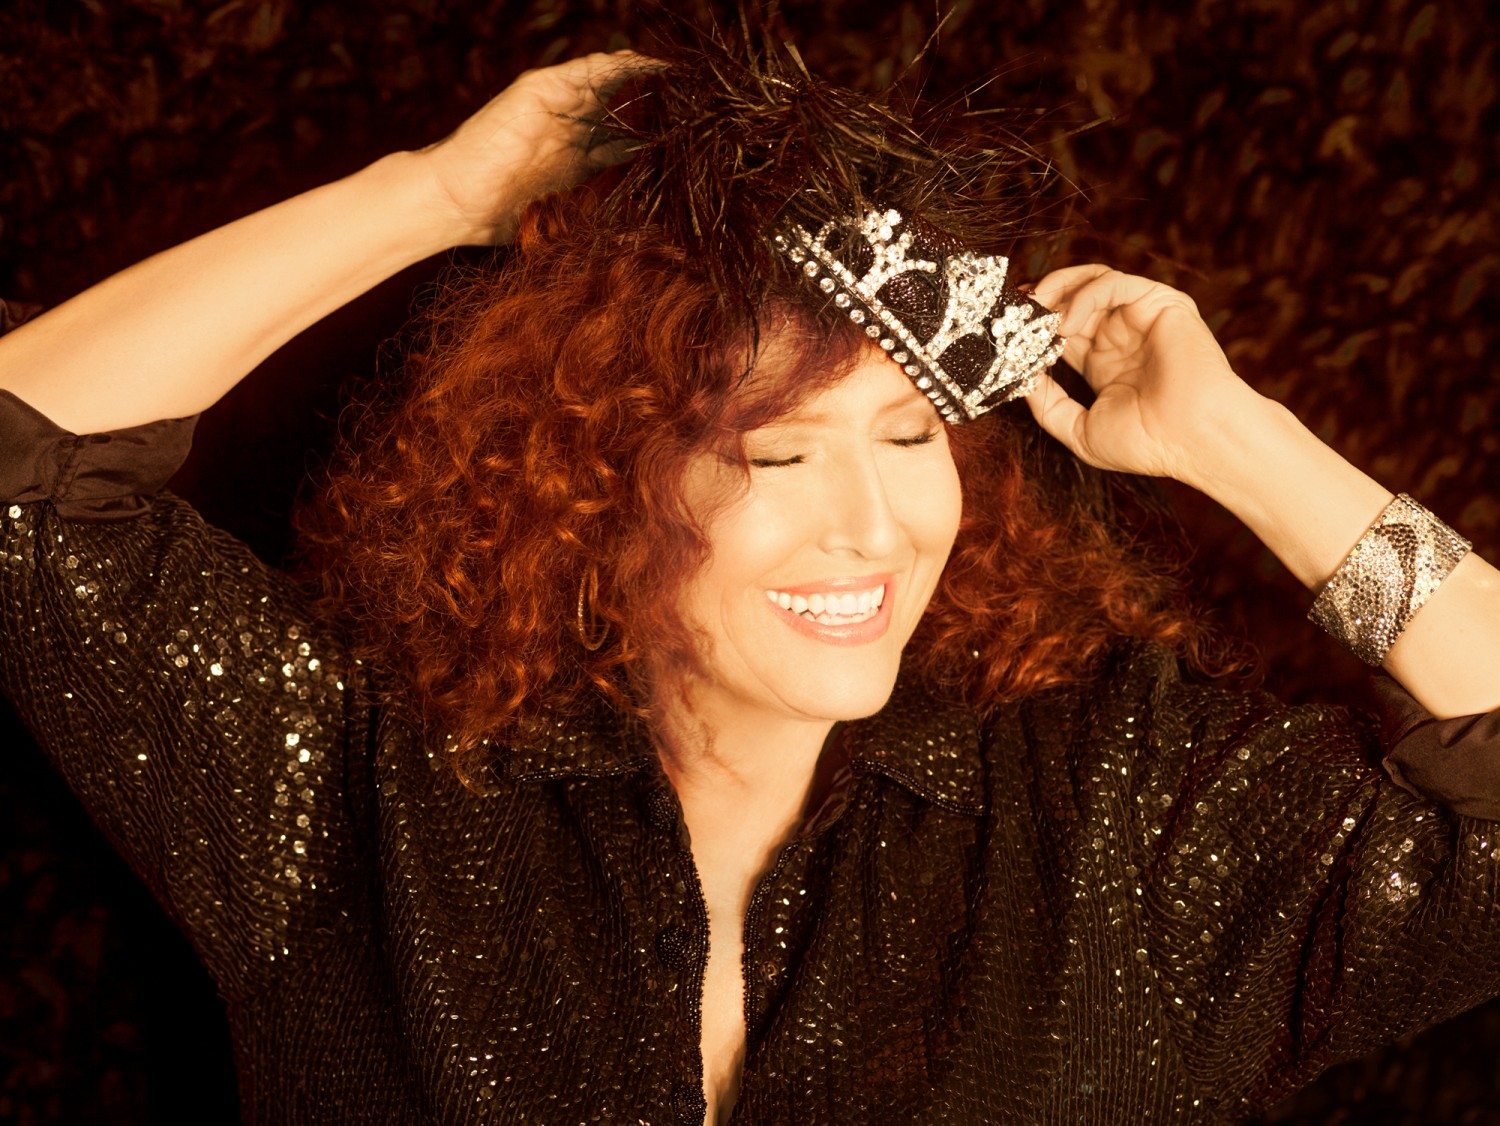 Melissa Manchester returns to New York for 3 shows at 54 Below, chats about new music